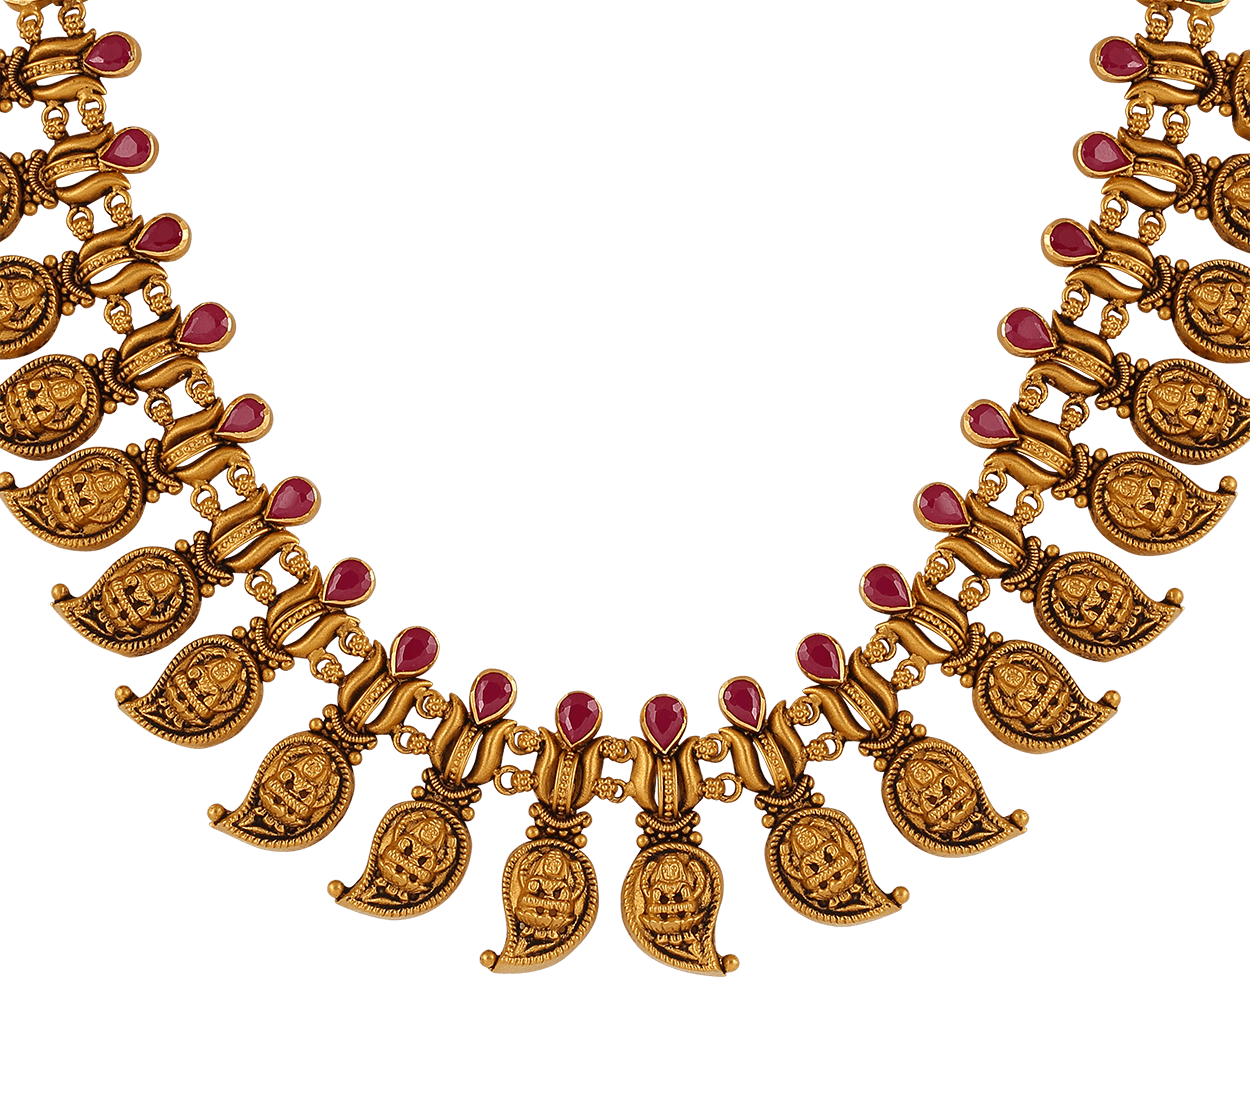 Beautiful Antique gold necklace | Gold jewellery design, Jewelry design  necklace, Gold jewelry fashion